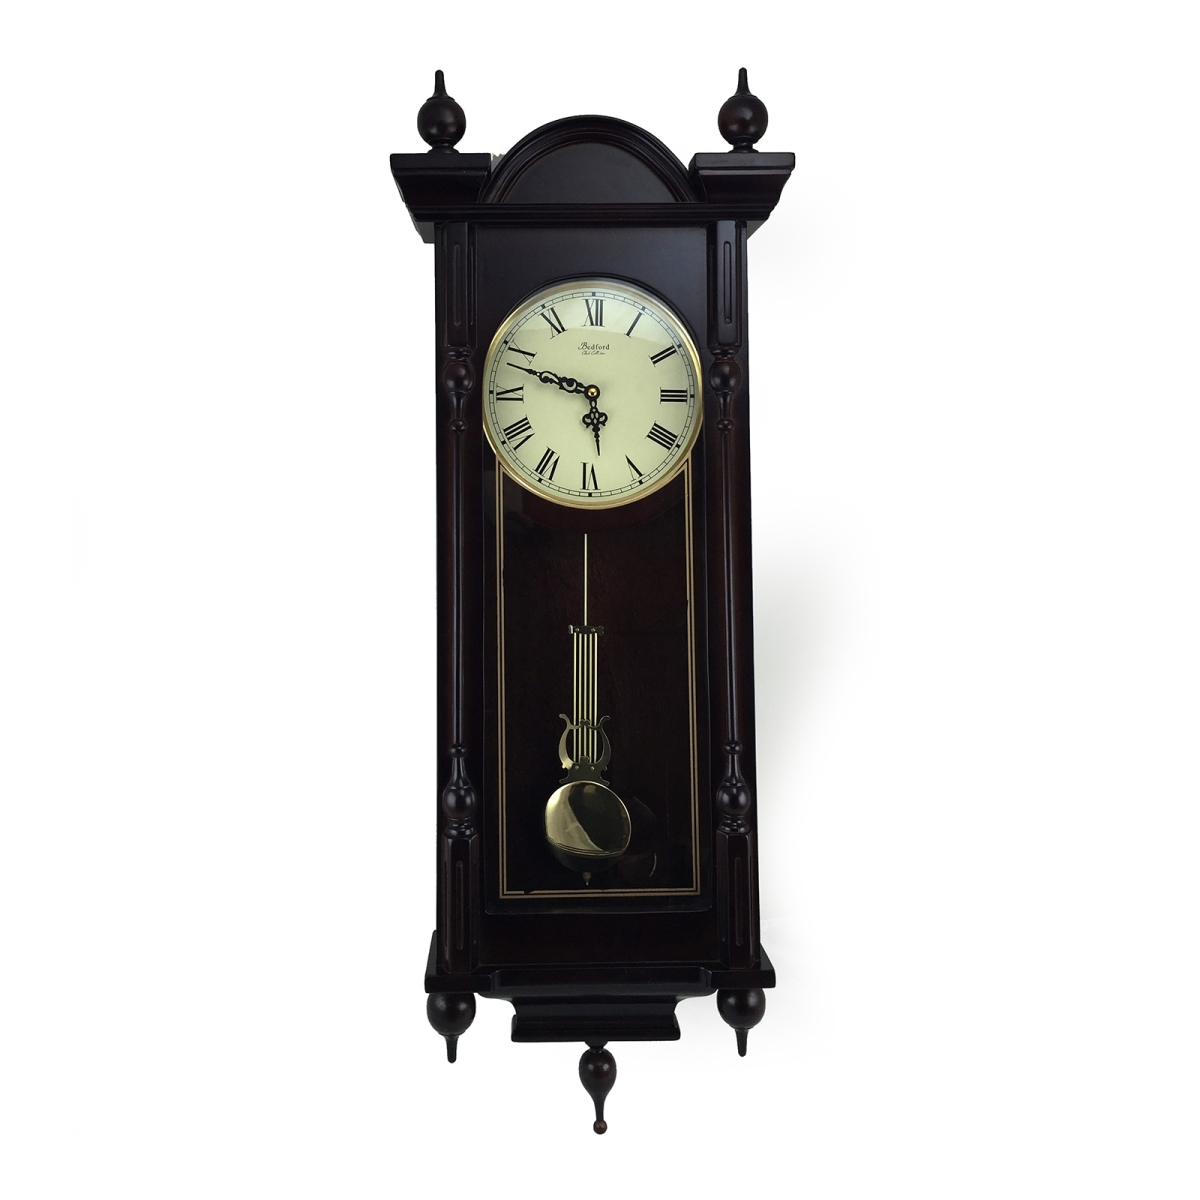 Bedford Clock Collection 31 in. Grand Antique Mahogany Cherry Oak Chiming Wall Clock with Roman Numerals